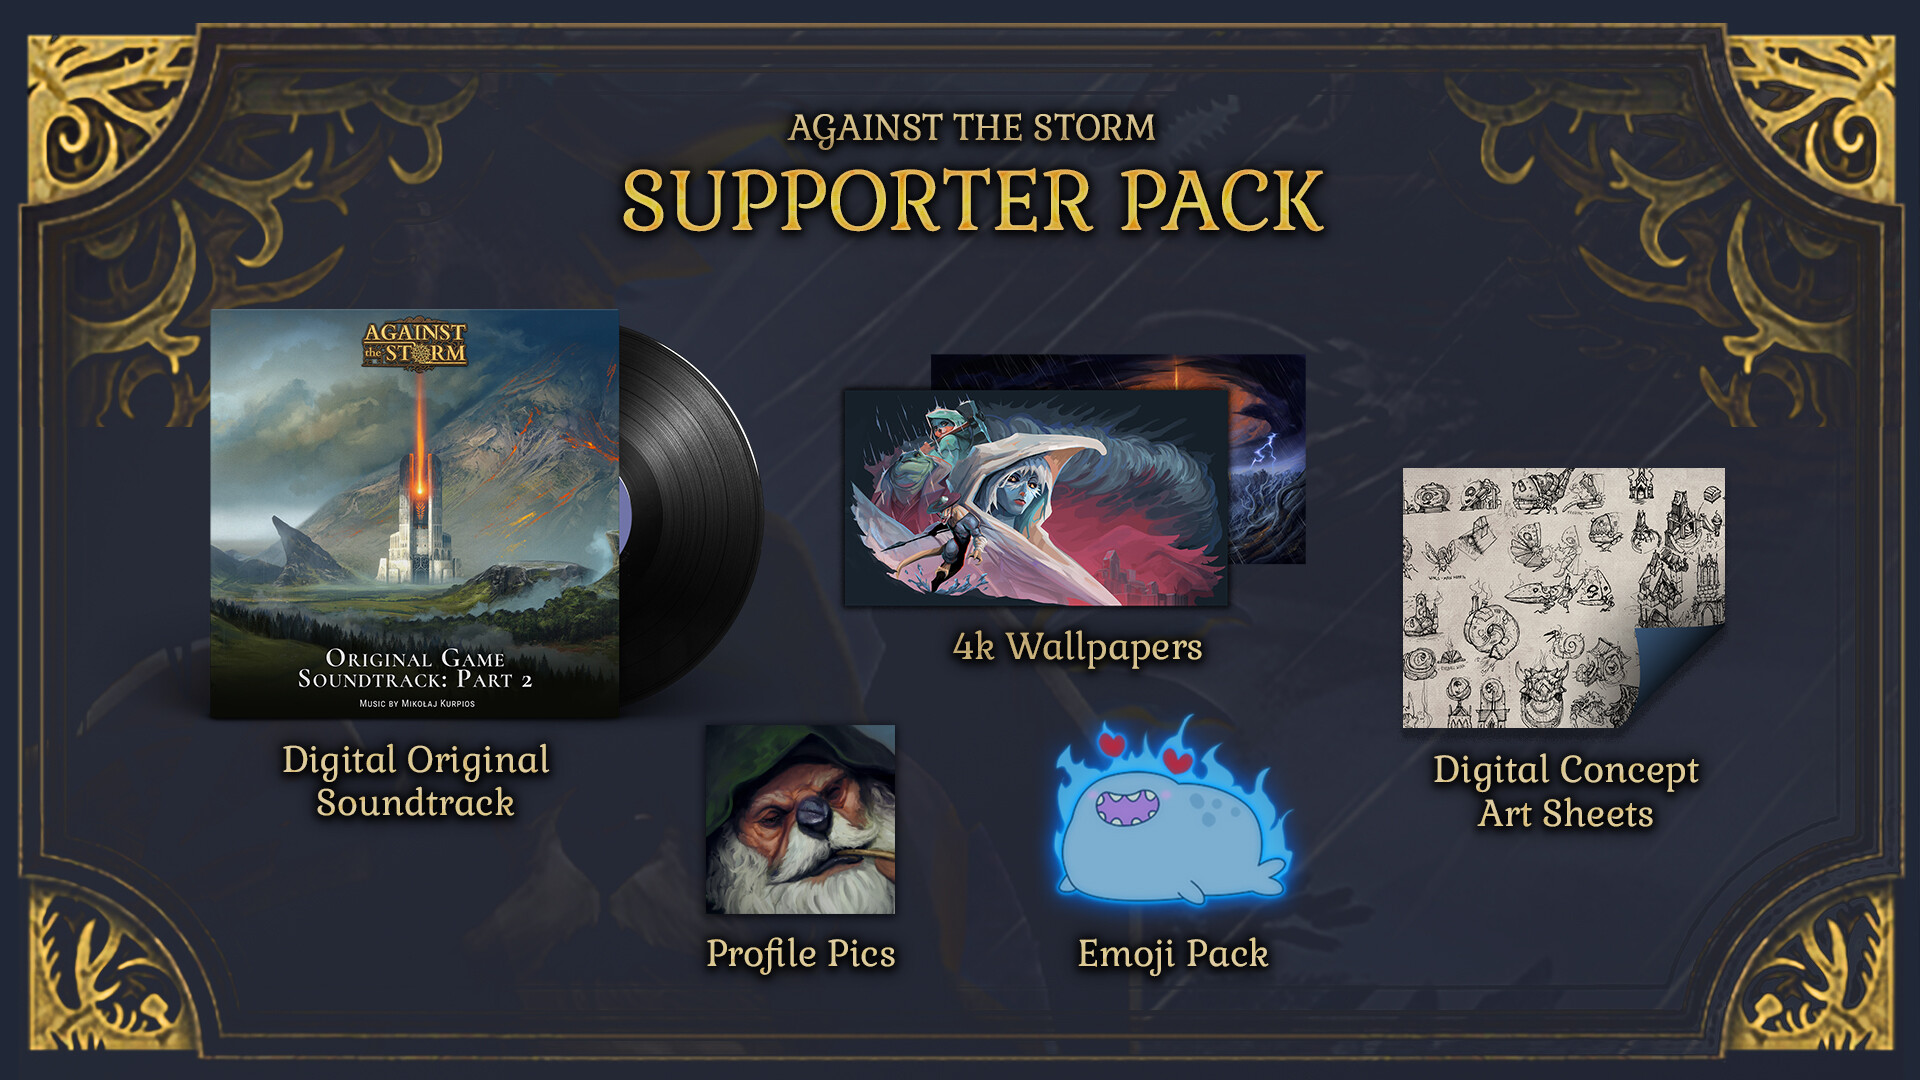 [$ 7.74] Against the Storm - Supporter Pack DLC Steam CD Key